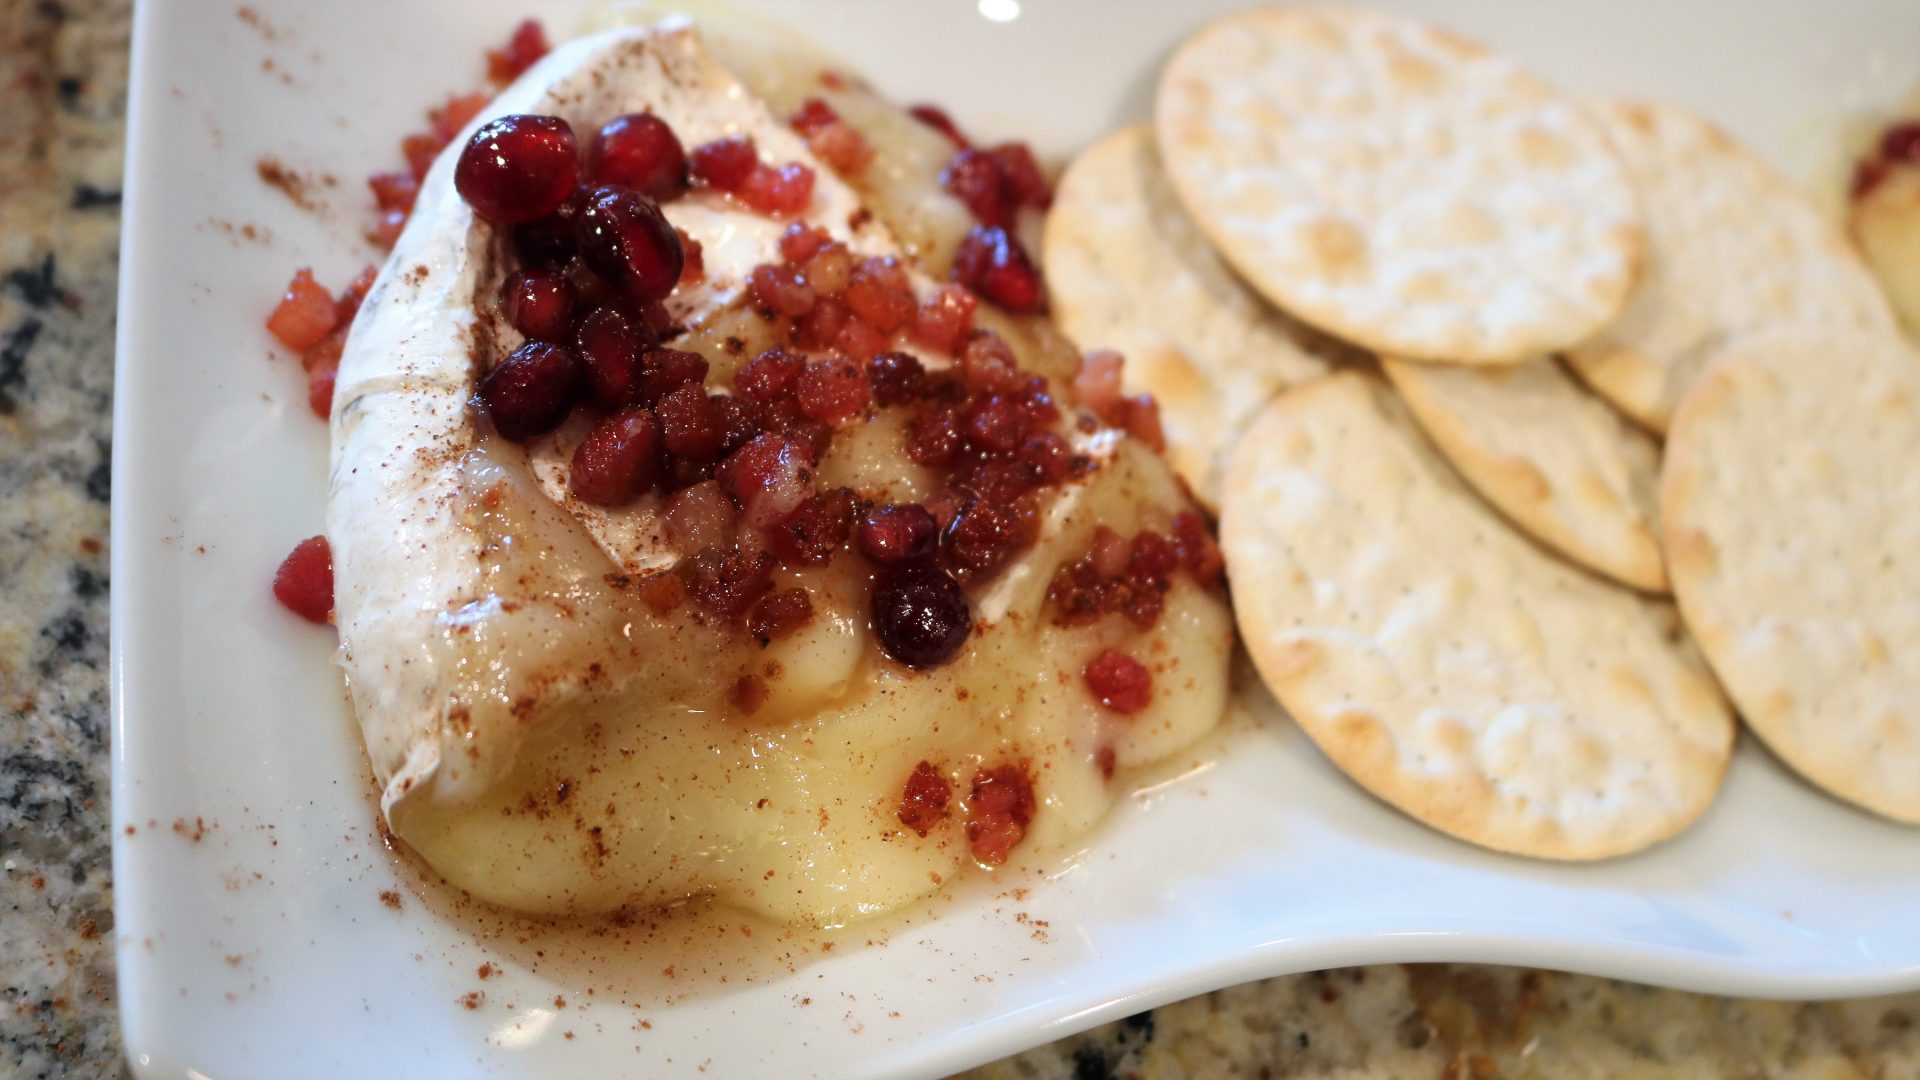 A plate of food with crackers and cranberry sauce.